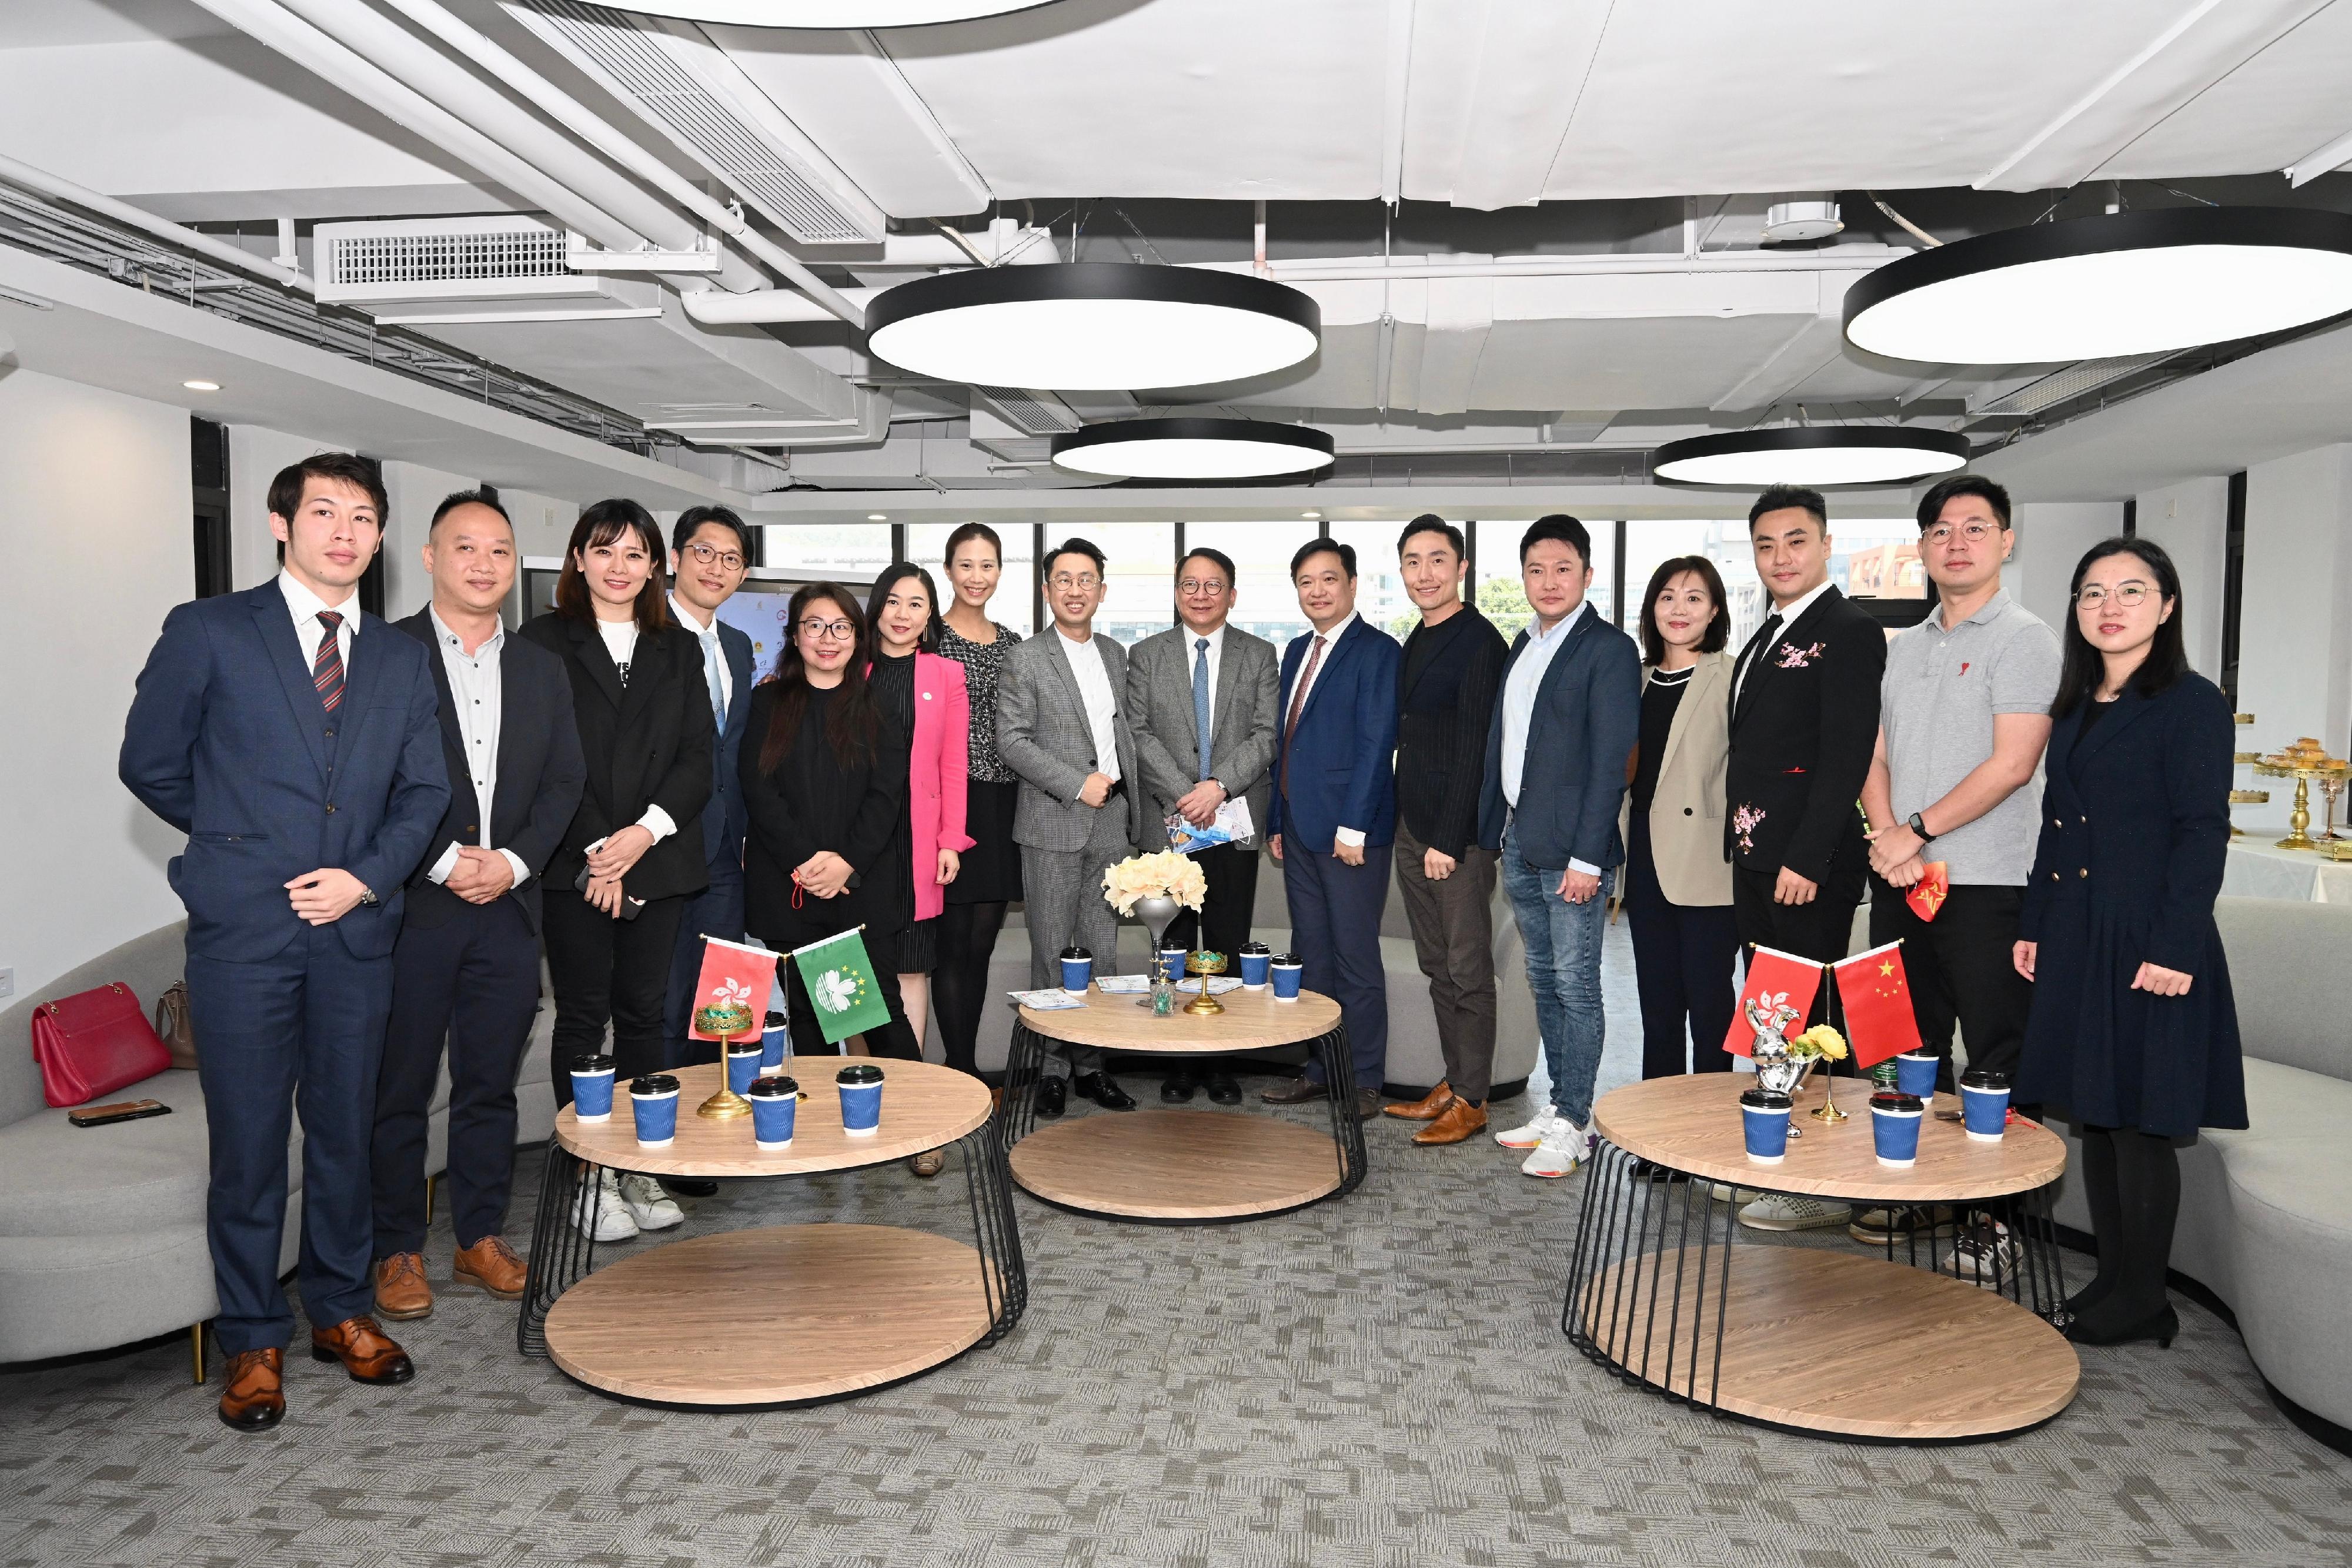 The Chief Secretary for Administration, Mr Chan Kwok-ki (eighth right), visited the Guangdong-Hong Kong-Macao Greater Bay Area (Guangdong) Innovation and Entrepreneurship Incubation Base in Guangzhou today (February 20). He was briefed on the one-stop services on innovation and entrepreneurship provided by the base to young people from Hong Kong and Macao, and exchanged views with representatives of a service organisation stationed in the base and some Hong Kong young entrepreneurs.